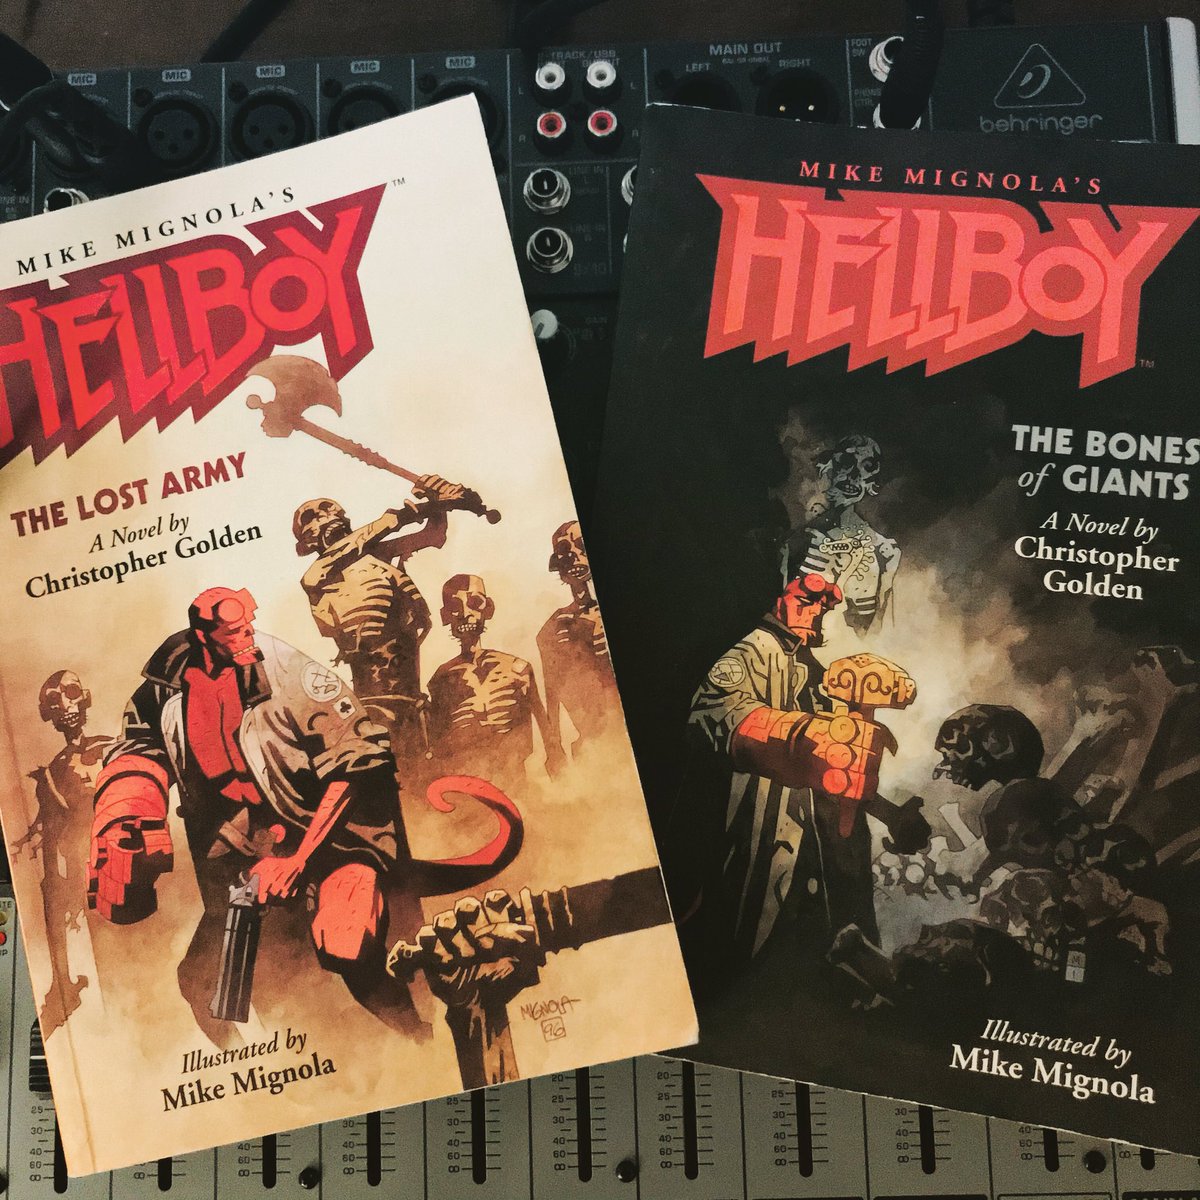 We discuss “The Voice Of Hellboy,” with Wayne Mitchell, audiobook narrator, on our latest podcast! LINK IN BIO! #hellboybookclub #podcast #hellboy #mikemignola #hellboynovel #audiobooknarrator #waynemitchell #christophergolden